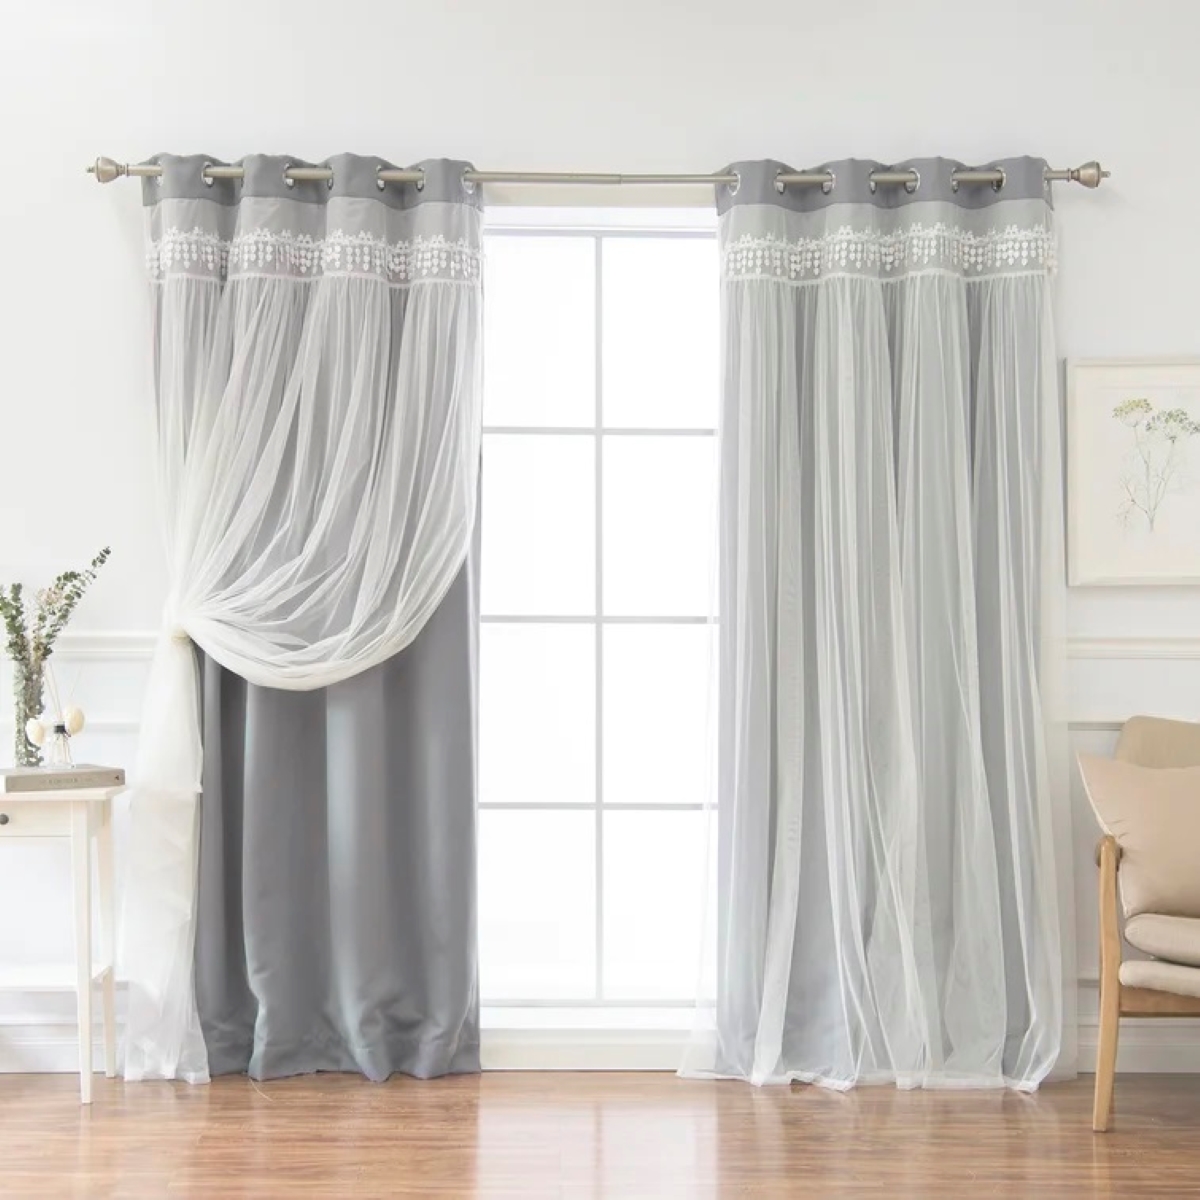 Layers of gray curtains on window